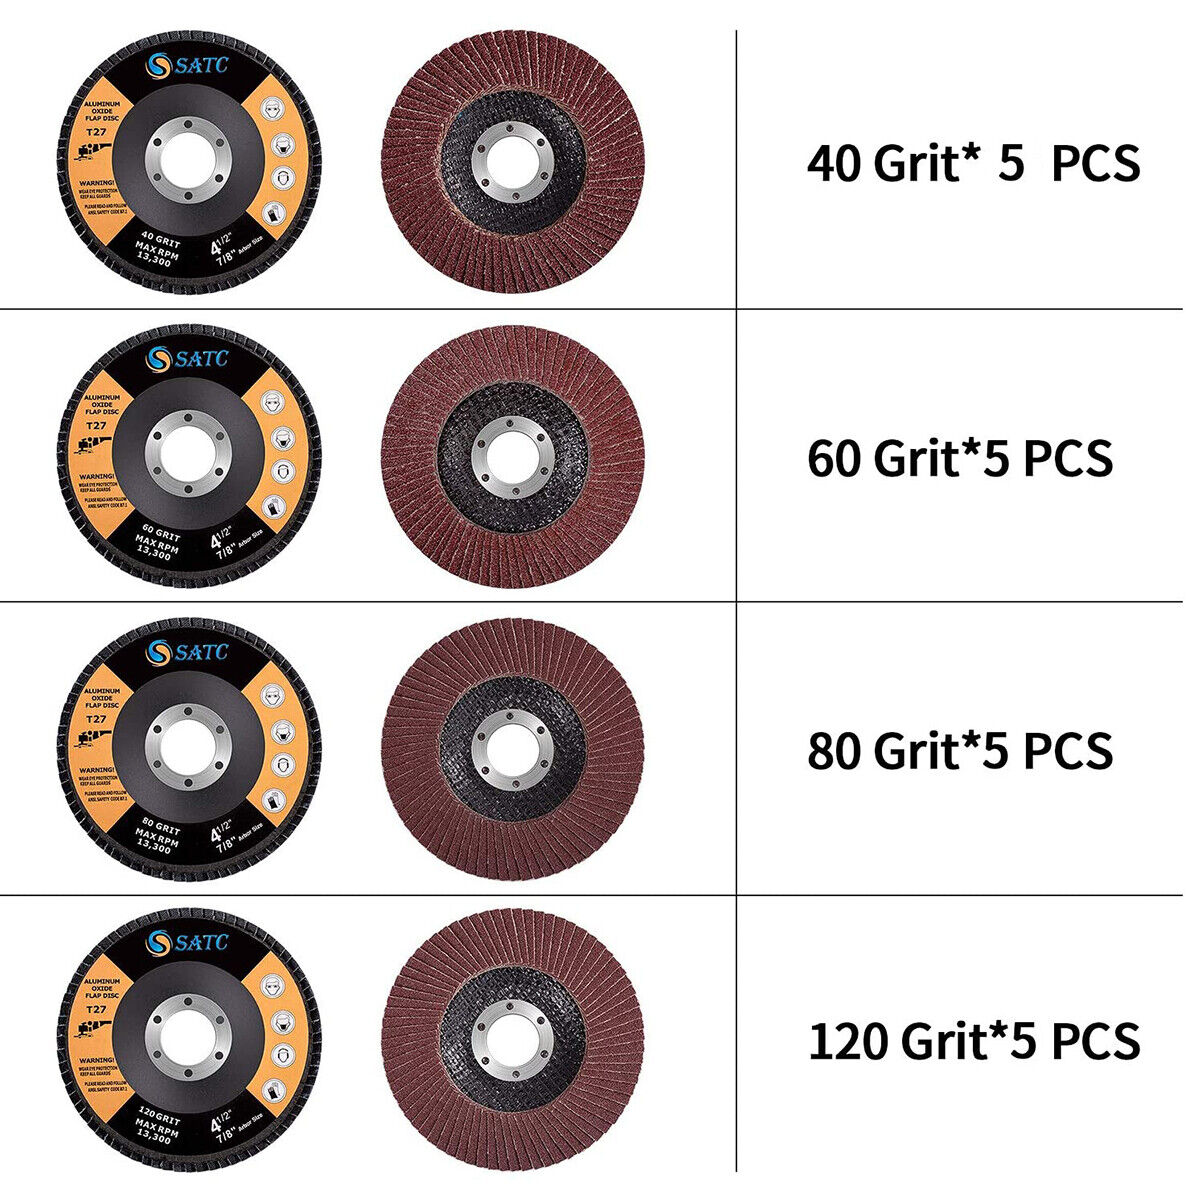 20x 4.5" 4-1/2 Flap Disc 40 60 80 120 Grit Angle Grinder Sanding Grinding Wheels Satc Does Not Apply - фотография #2